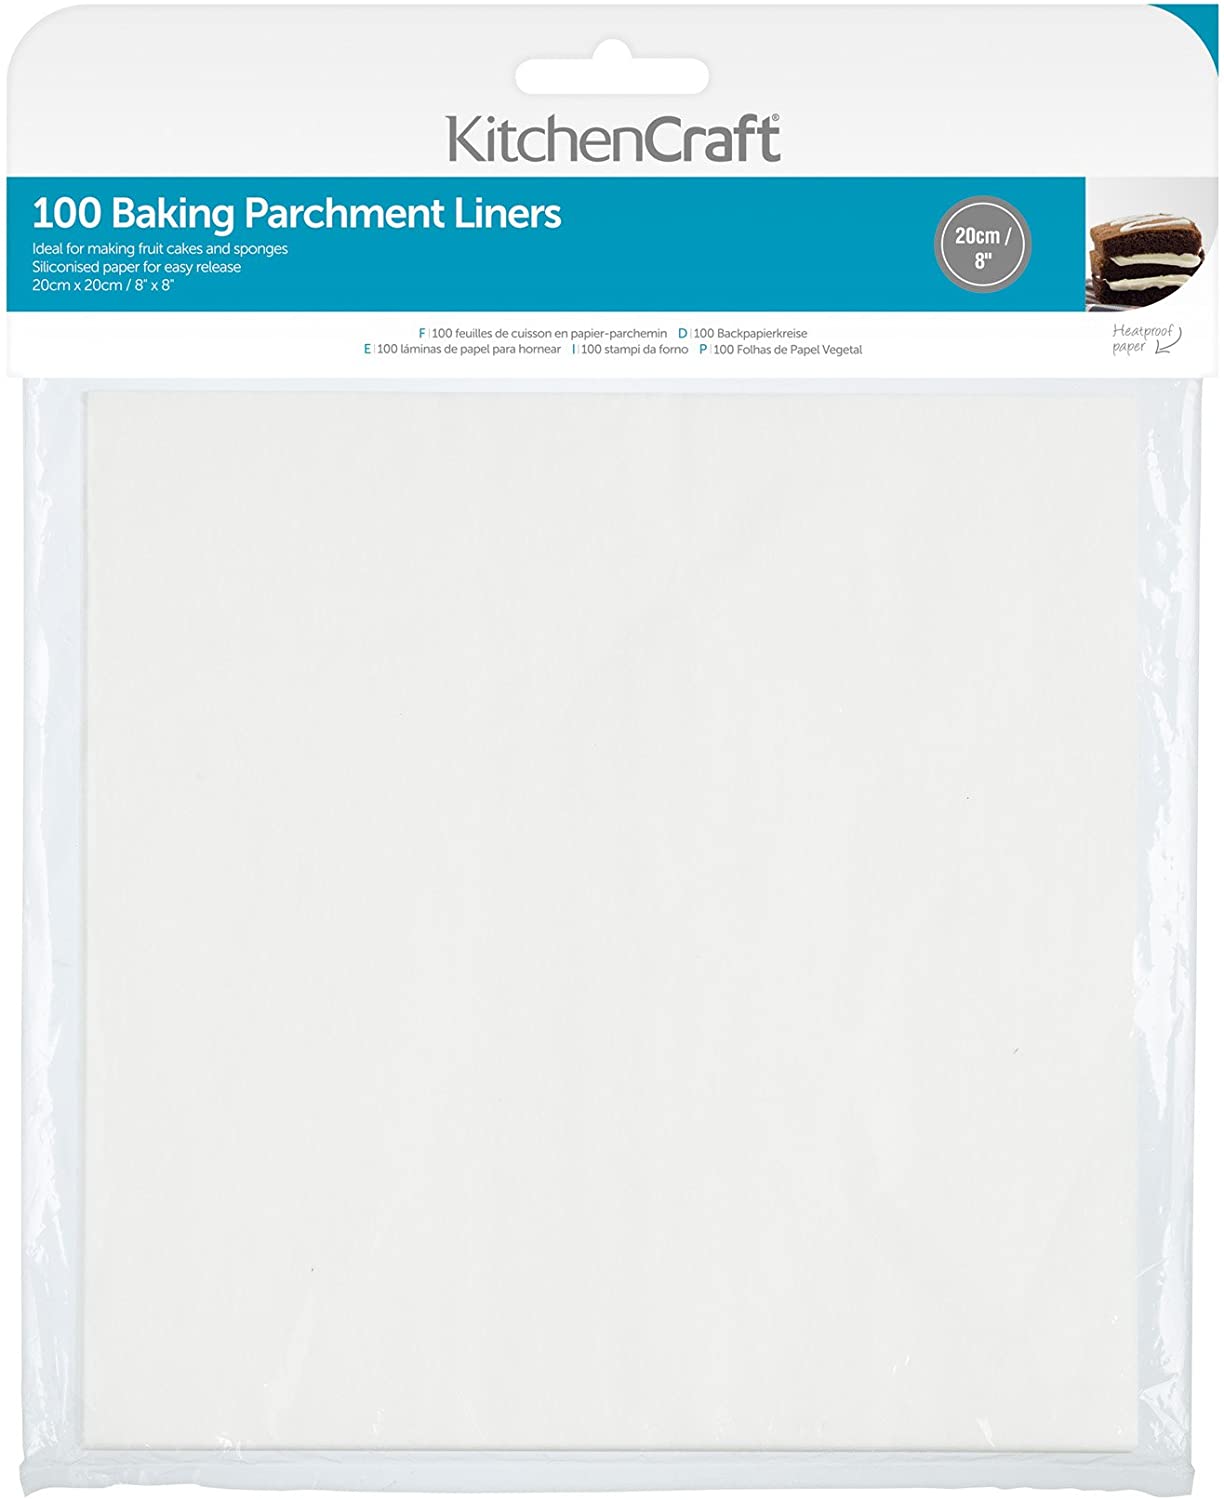 KitchenCraft Greaseproof Non-Stick Baking Paper, 20 cm (8 Inches) Square (Pack of 100), Paper, White, cm, 20 x 20 x 0.1 cm, 1 Unit